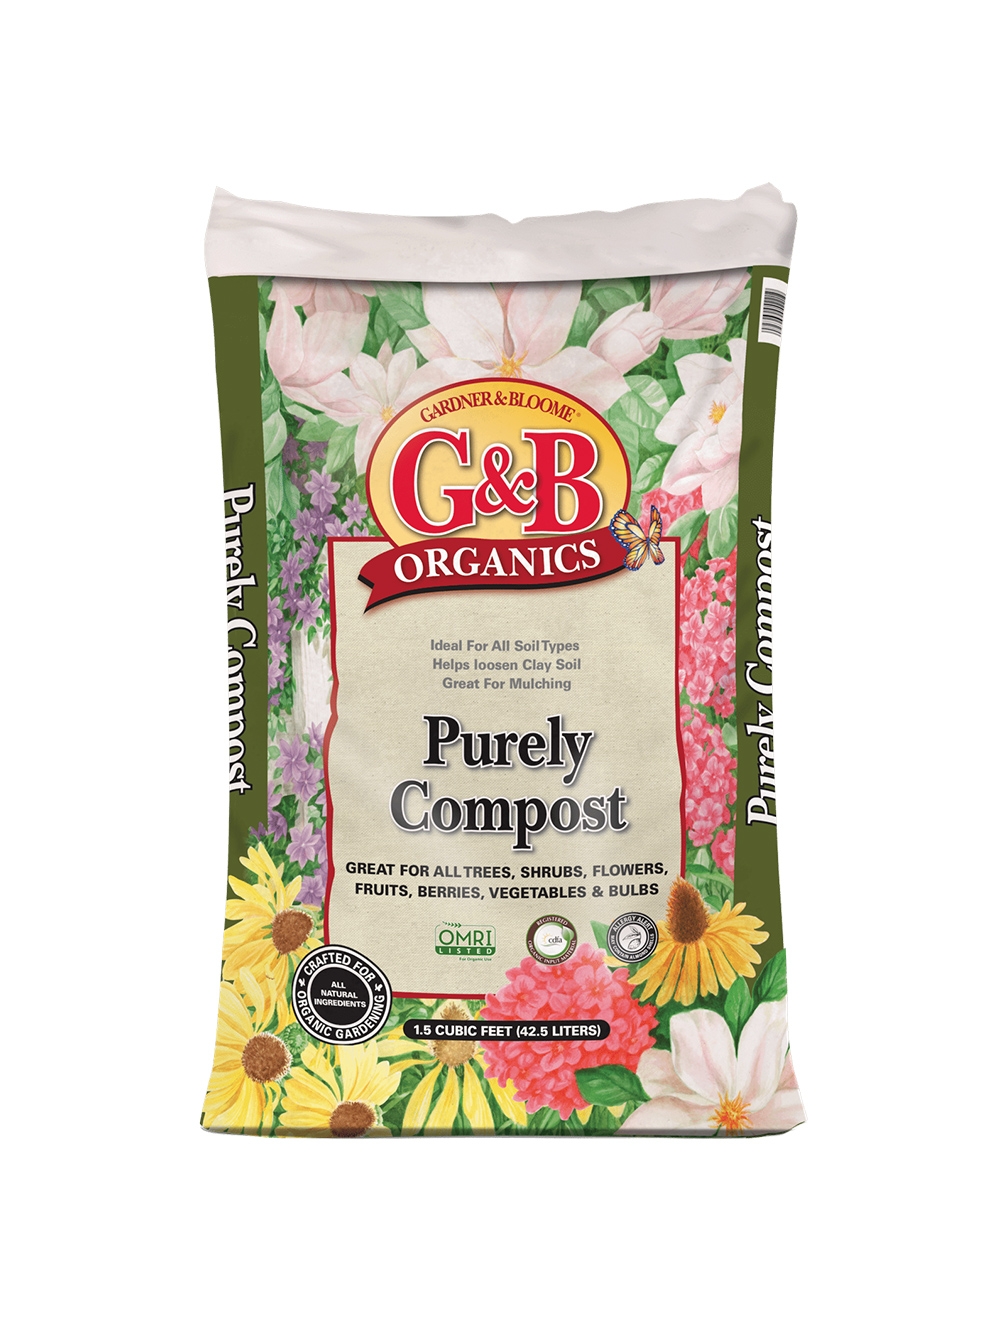 Purely Compost